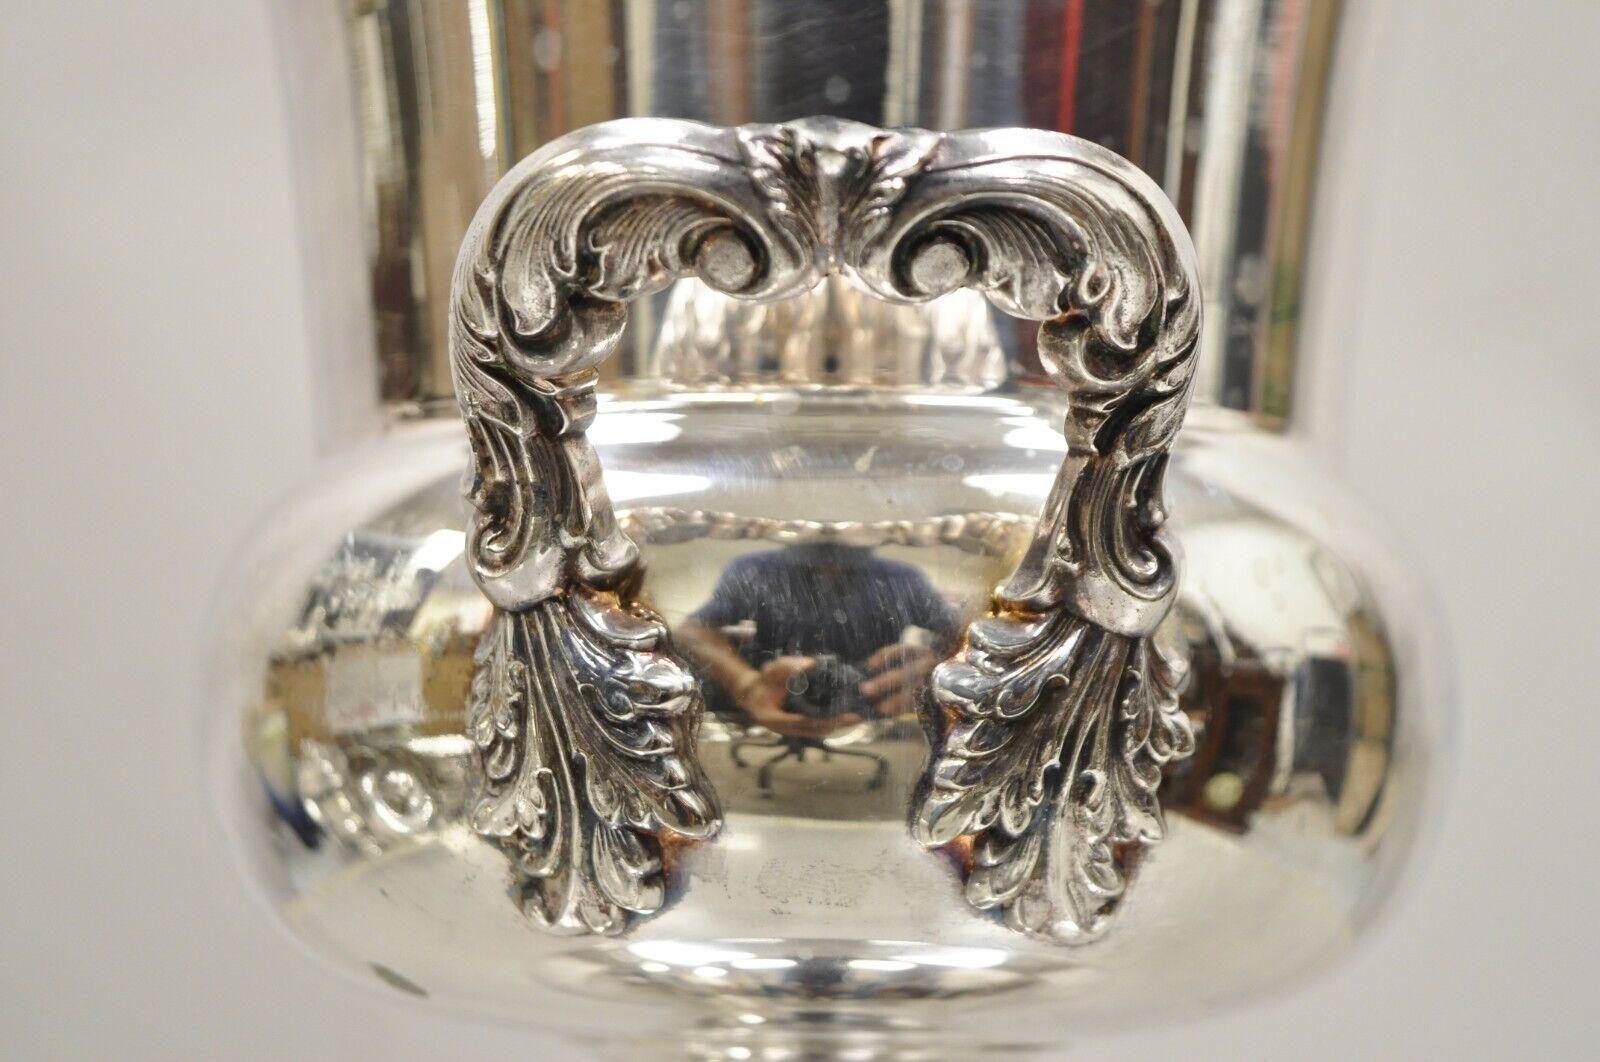 Victorian Vintage EPCA Silverplate by Poole 423 Trophy Cup Champagne Chiller Ice Bucket For Sale